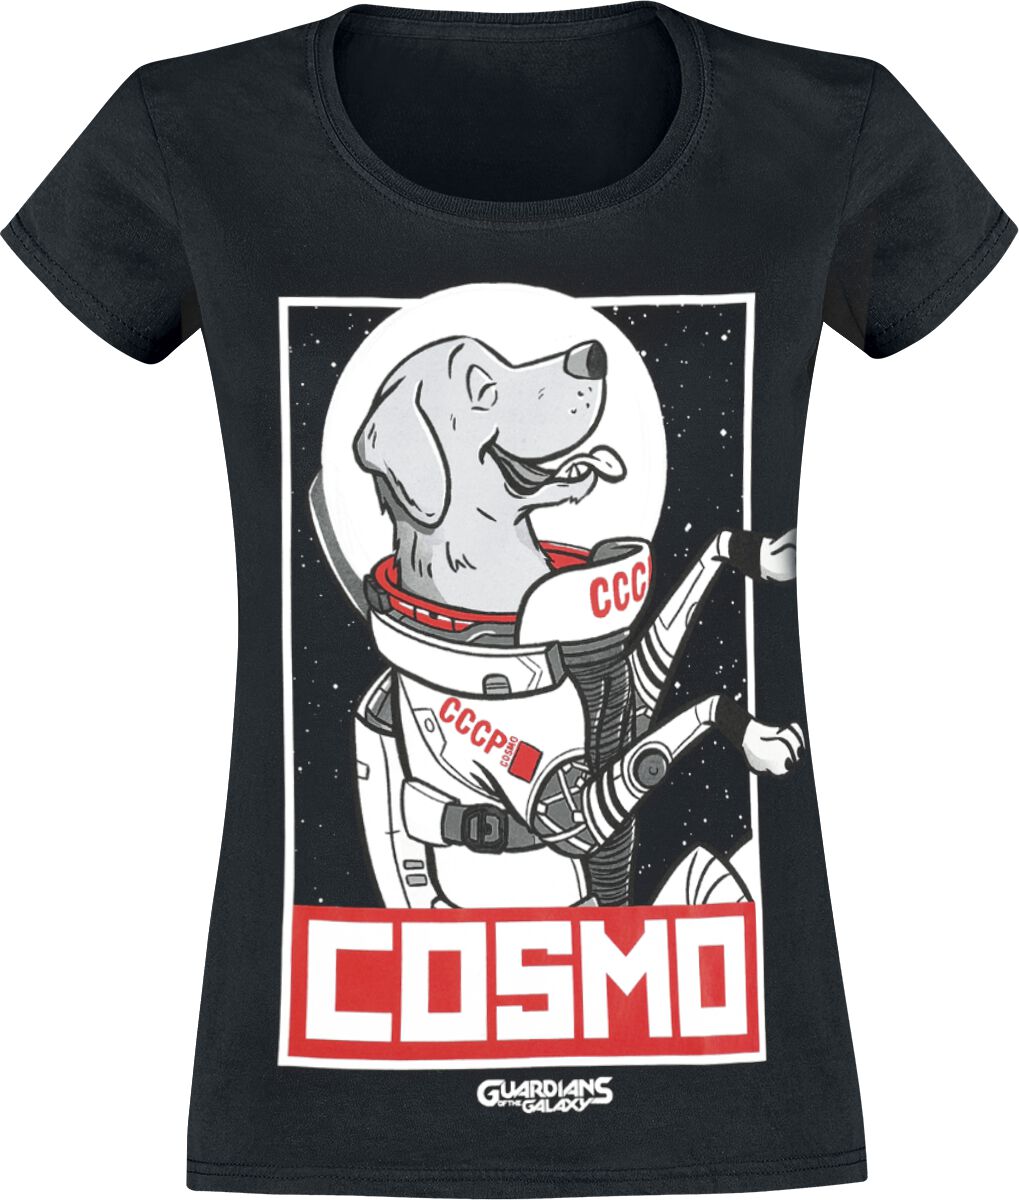 Guardians Of The Galaxy - Game - Cosmo T-Shirt black